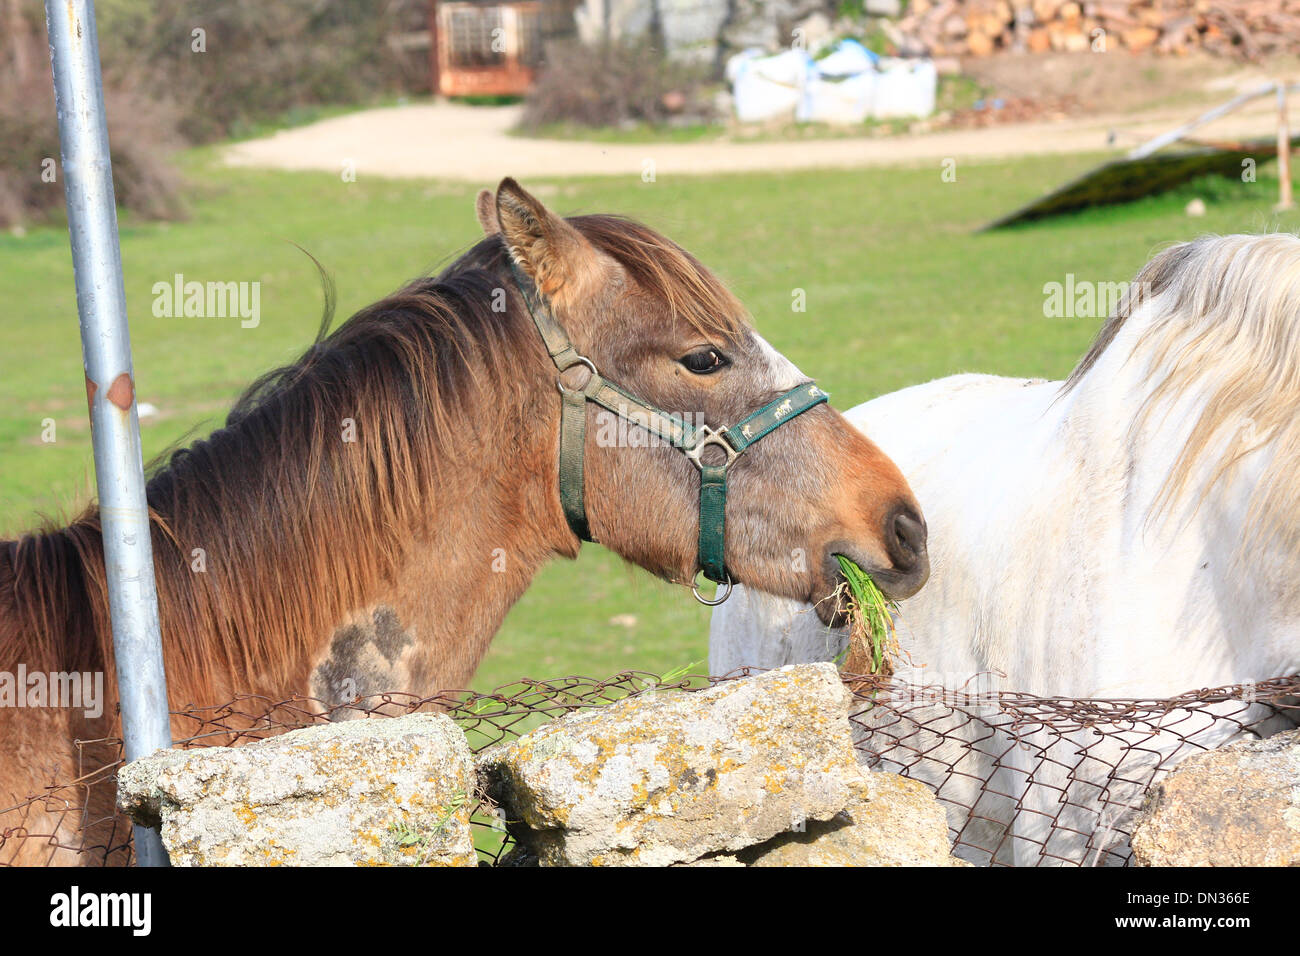 Pretty Pony brown and white spots Stock Photo